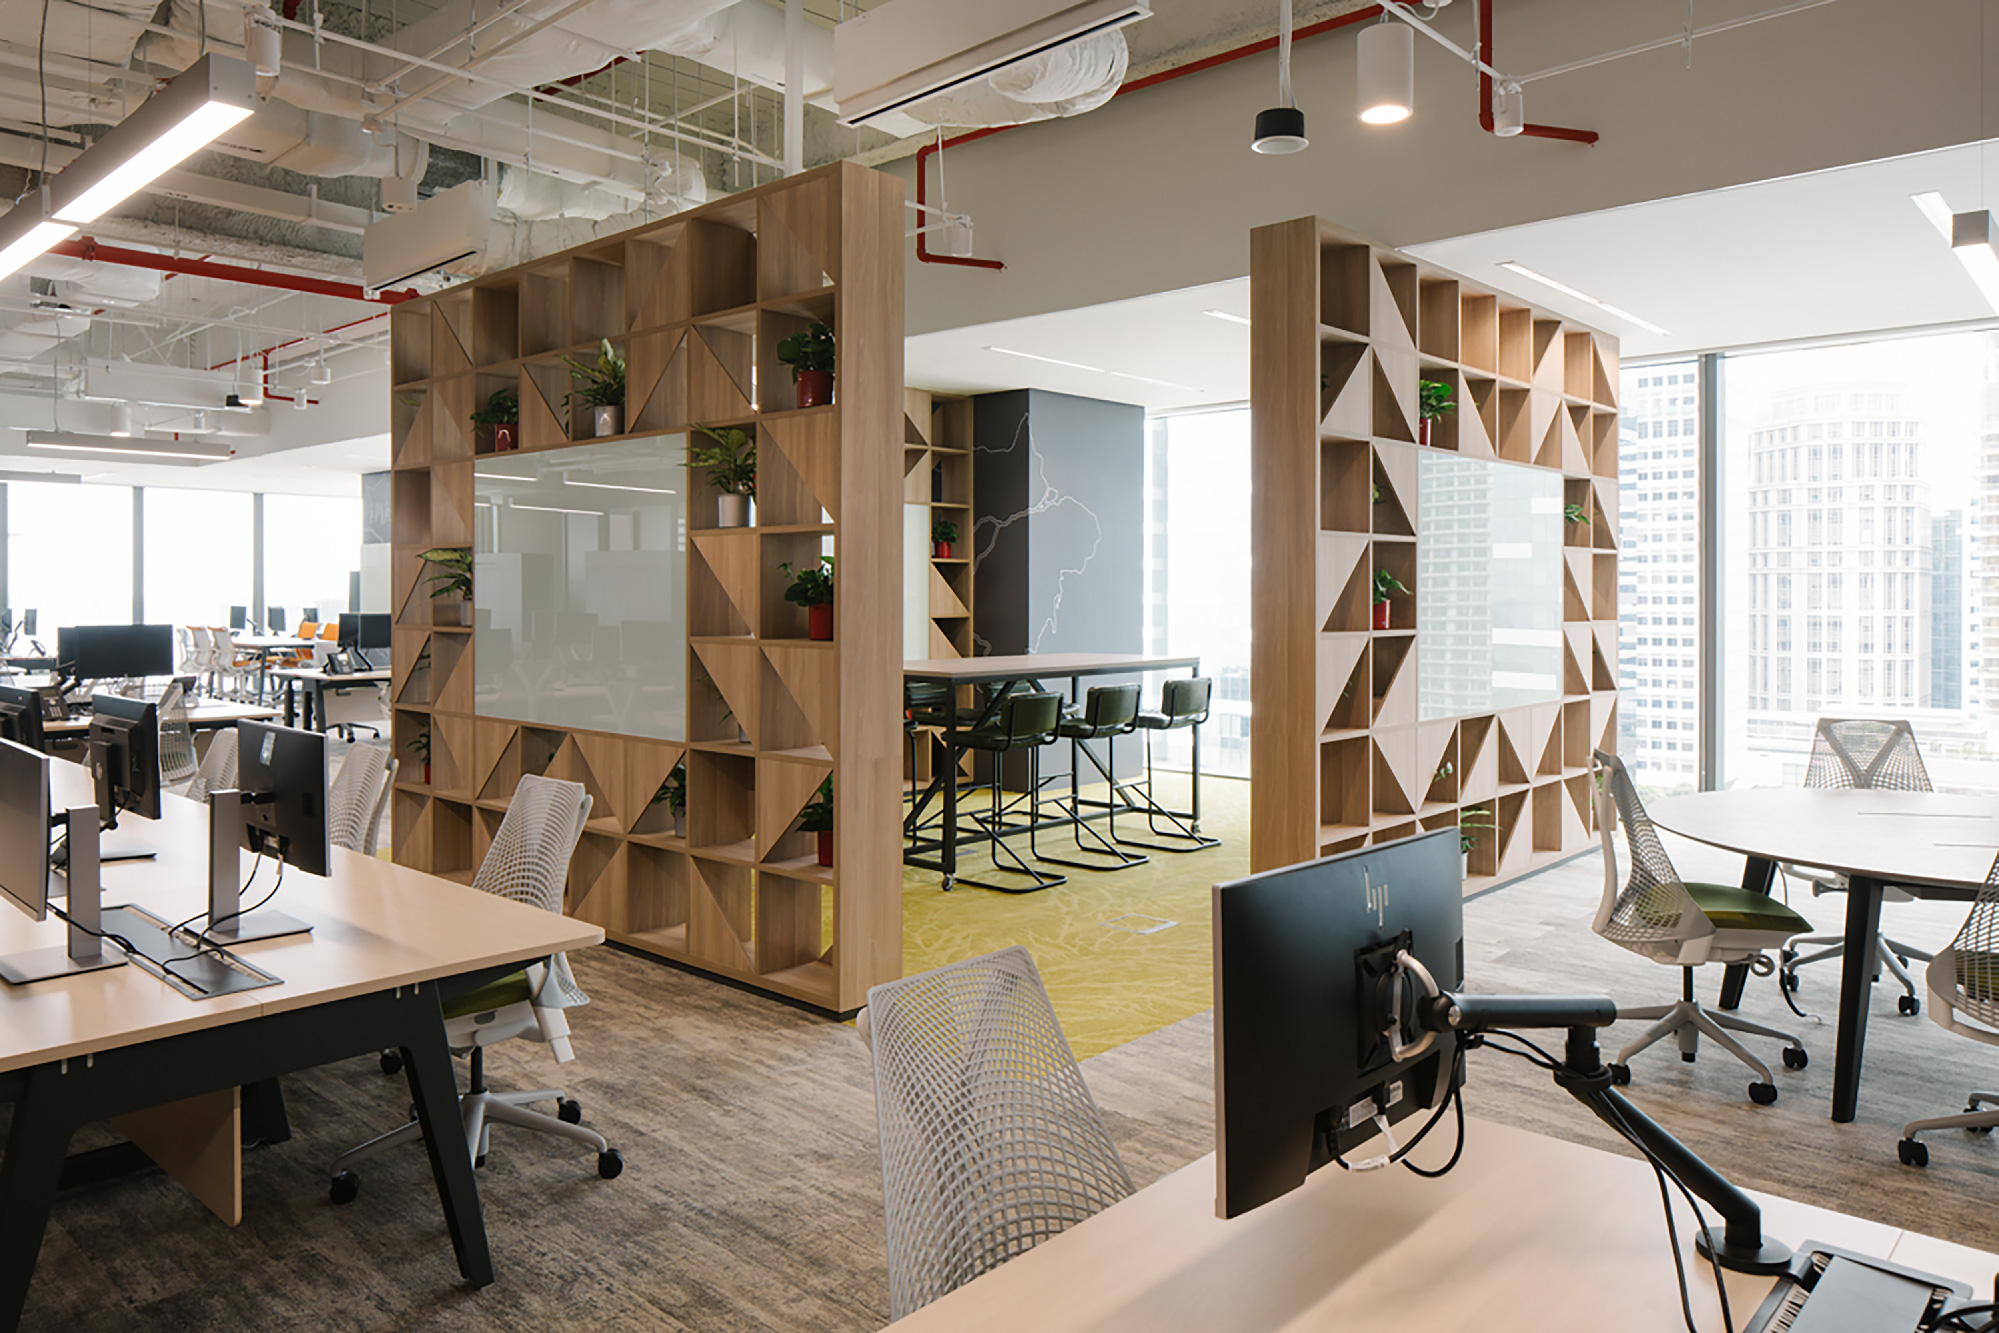 The Prudential office in Singapore exemplifies cultural transformation and embracing change in the workplace